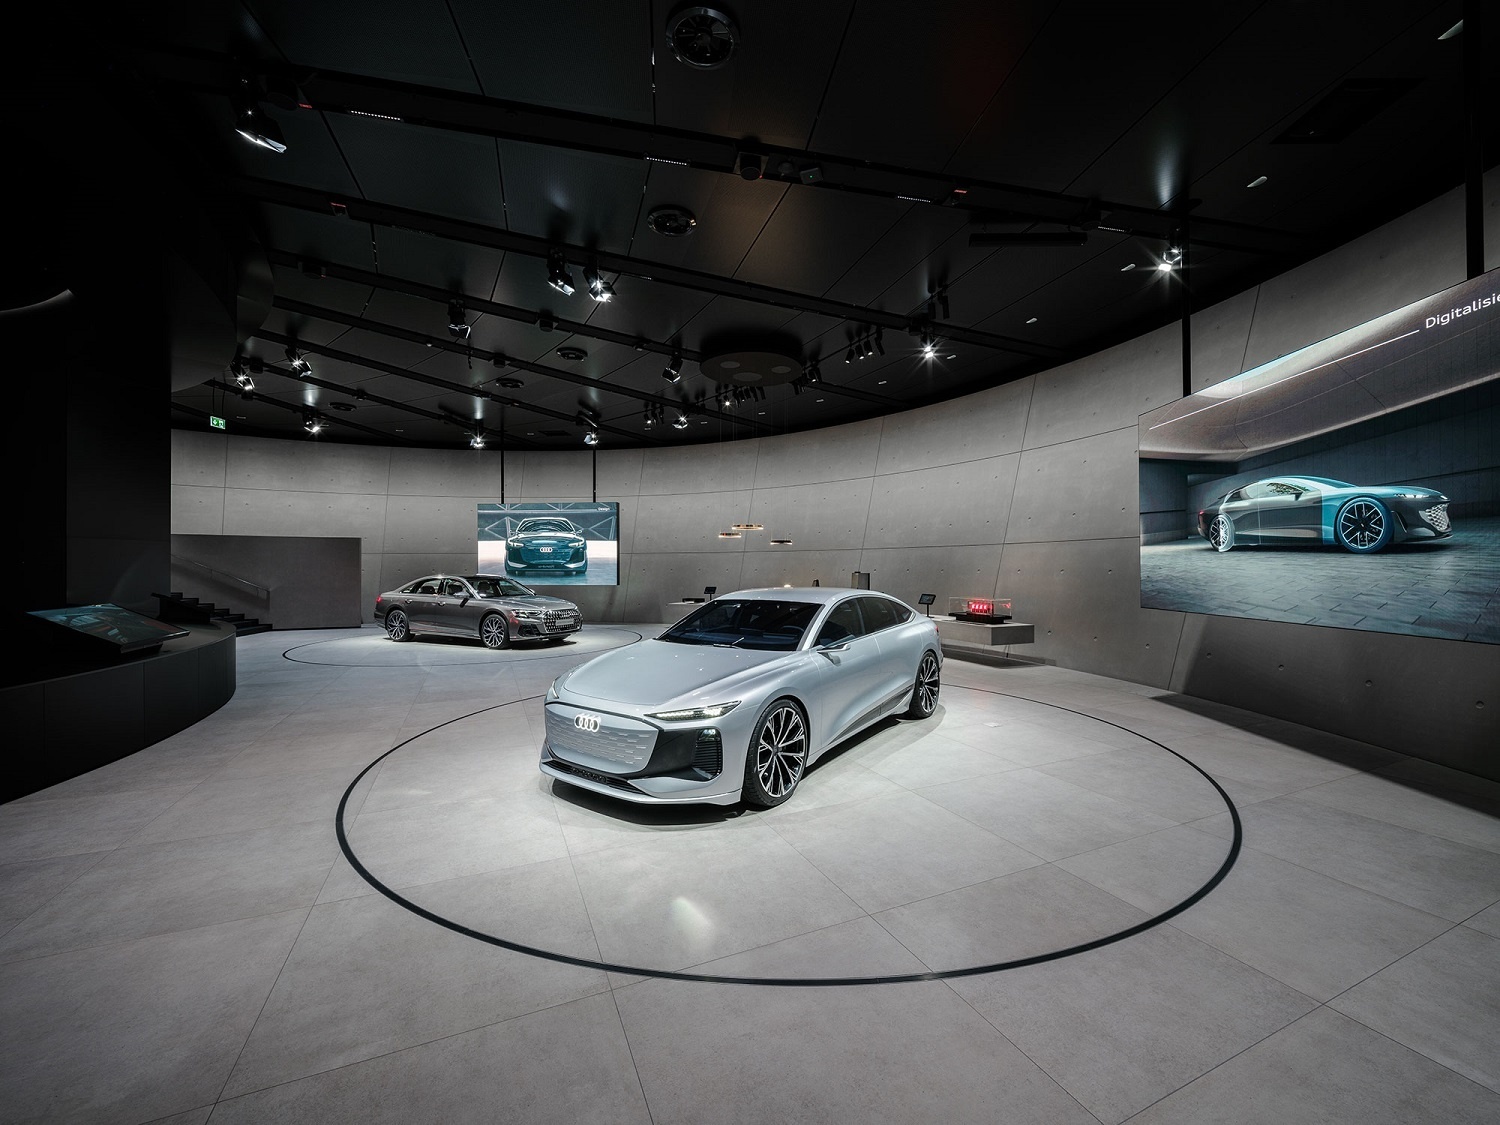 The Audi A6 e-tron concept and the plug-in hybrid Audi A8 60 TFSI e together with exhibits on an elongated lowboard bring the themes of digitization and design to life.